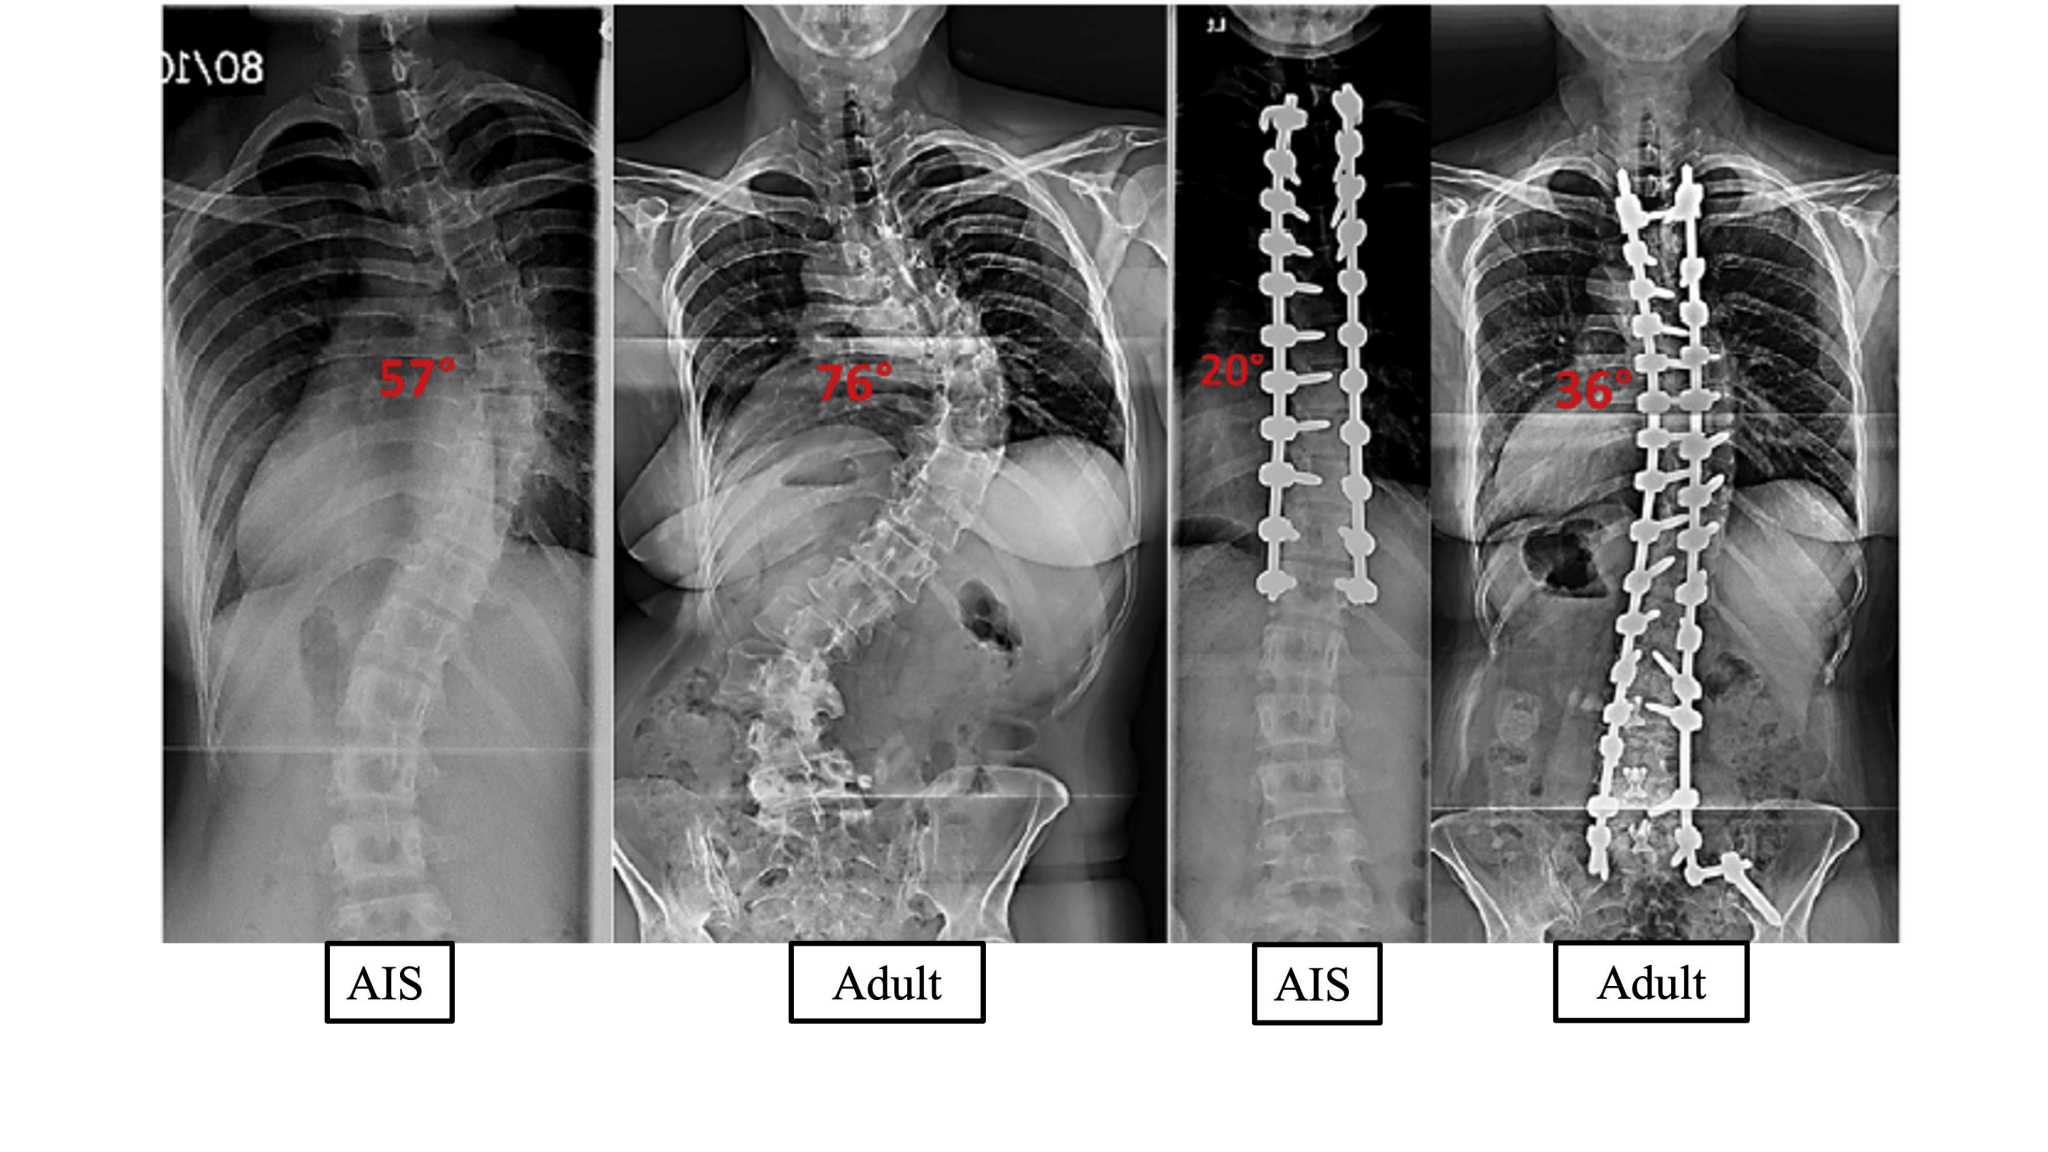 Levoscoliosis and Dextroscoliosis: How Are They Different?